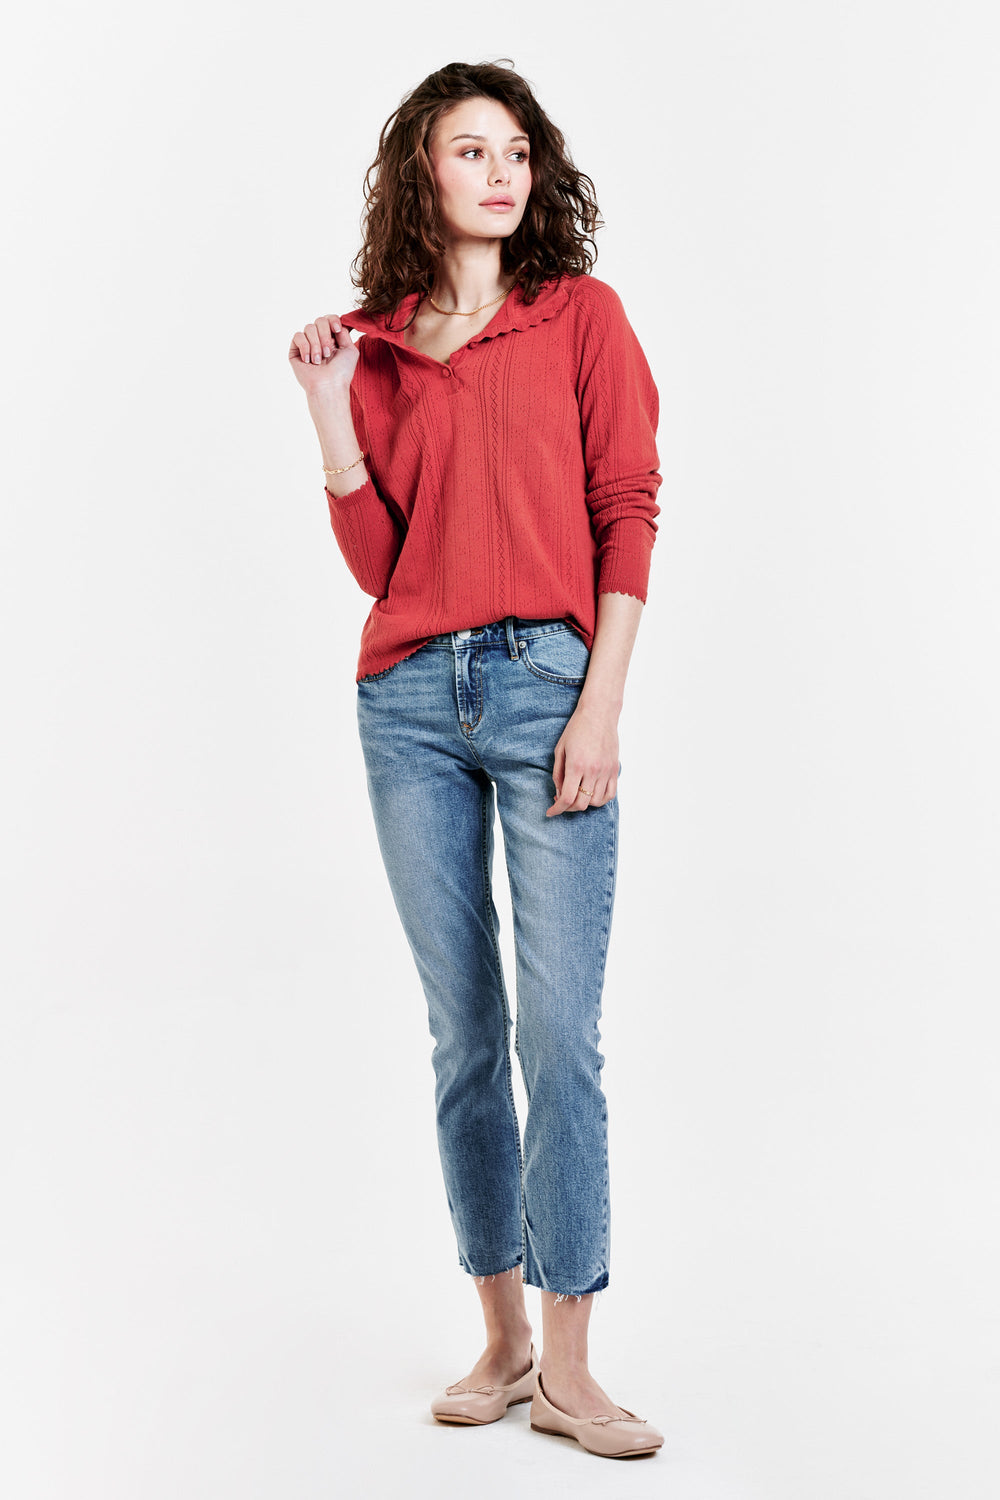 image of a female model wearing a ELIZABETH BUTTON FRONT HENLEY PERSIMMON TOPS